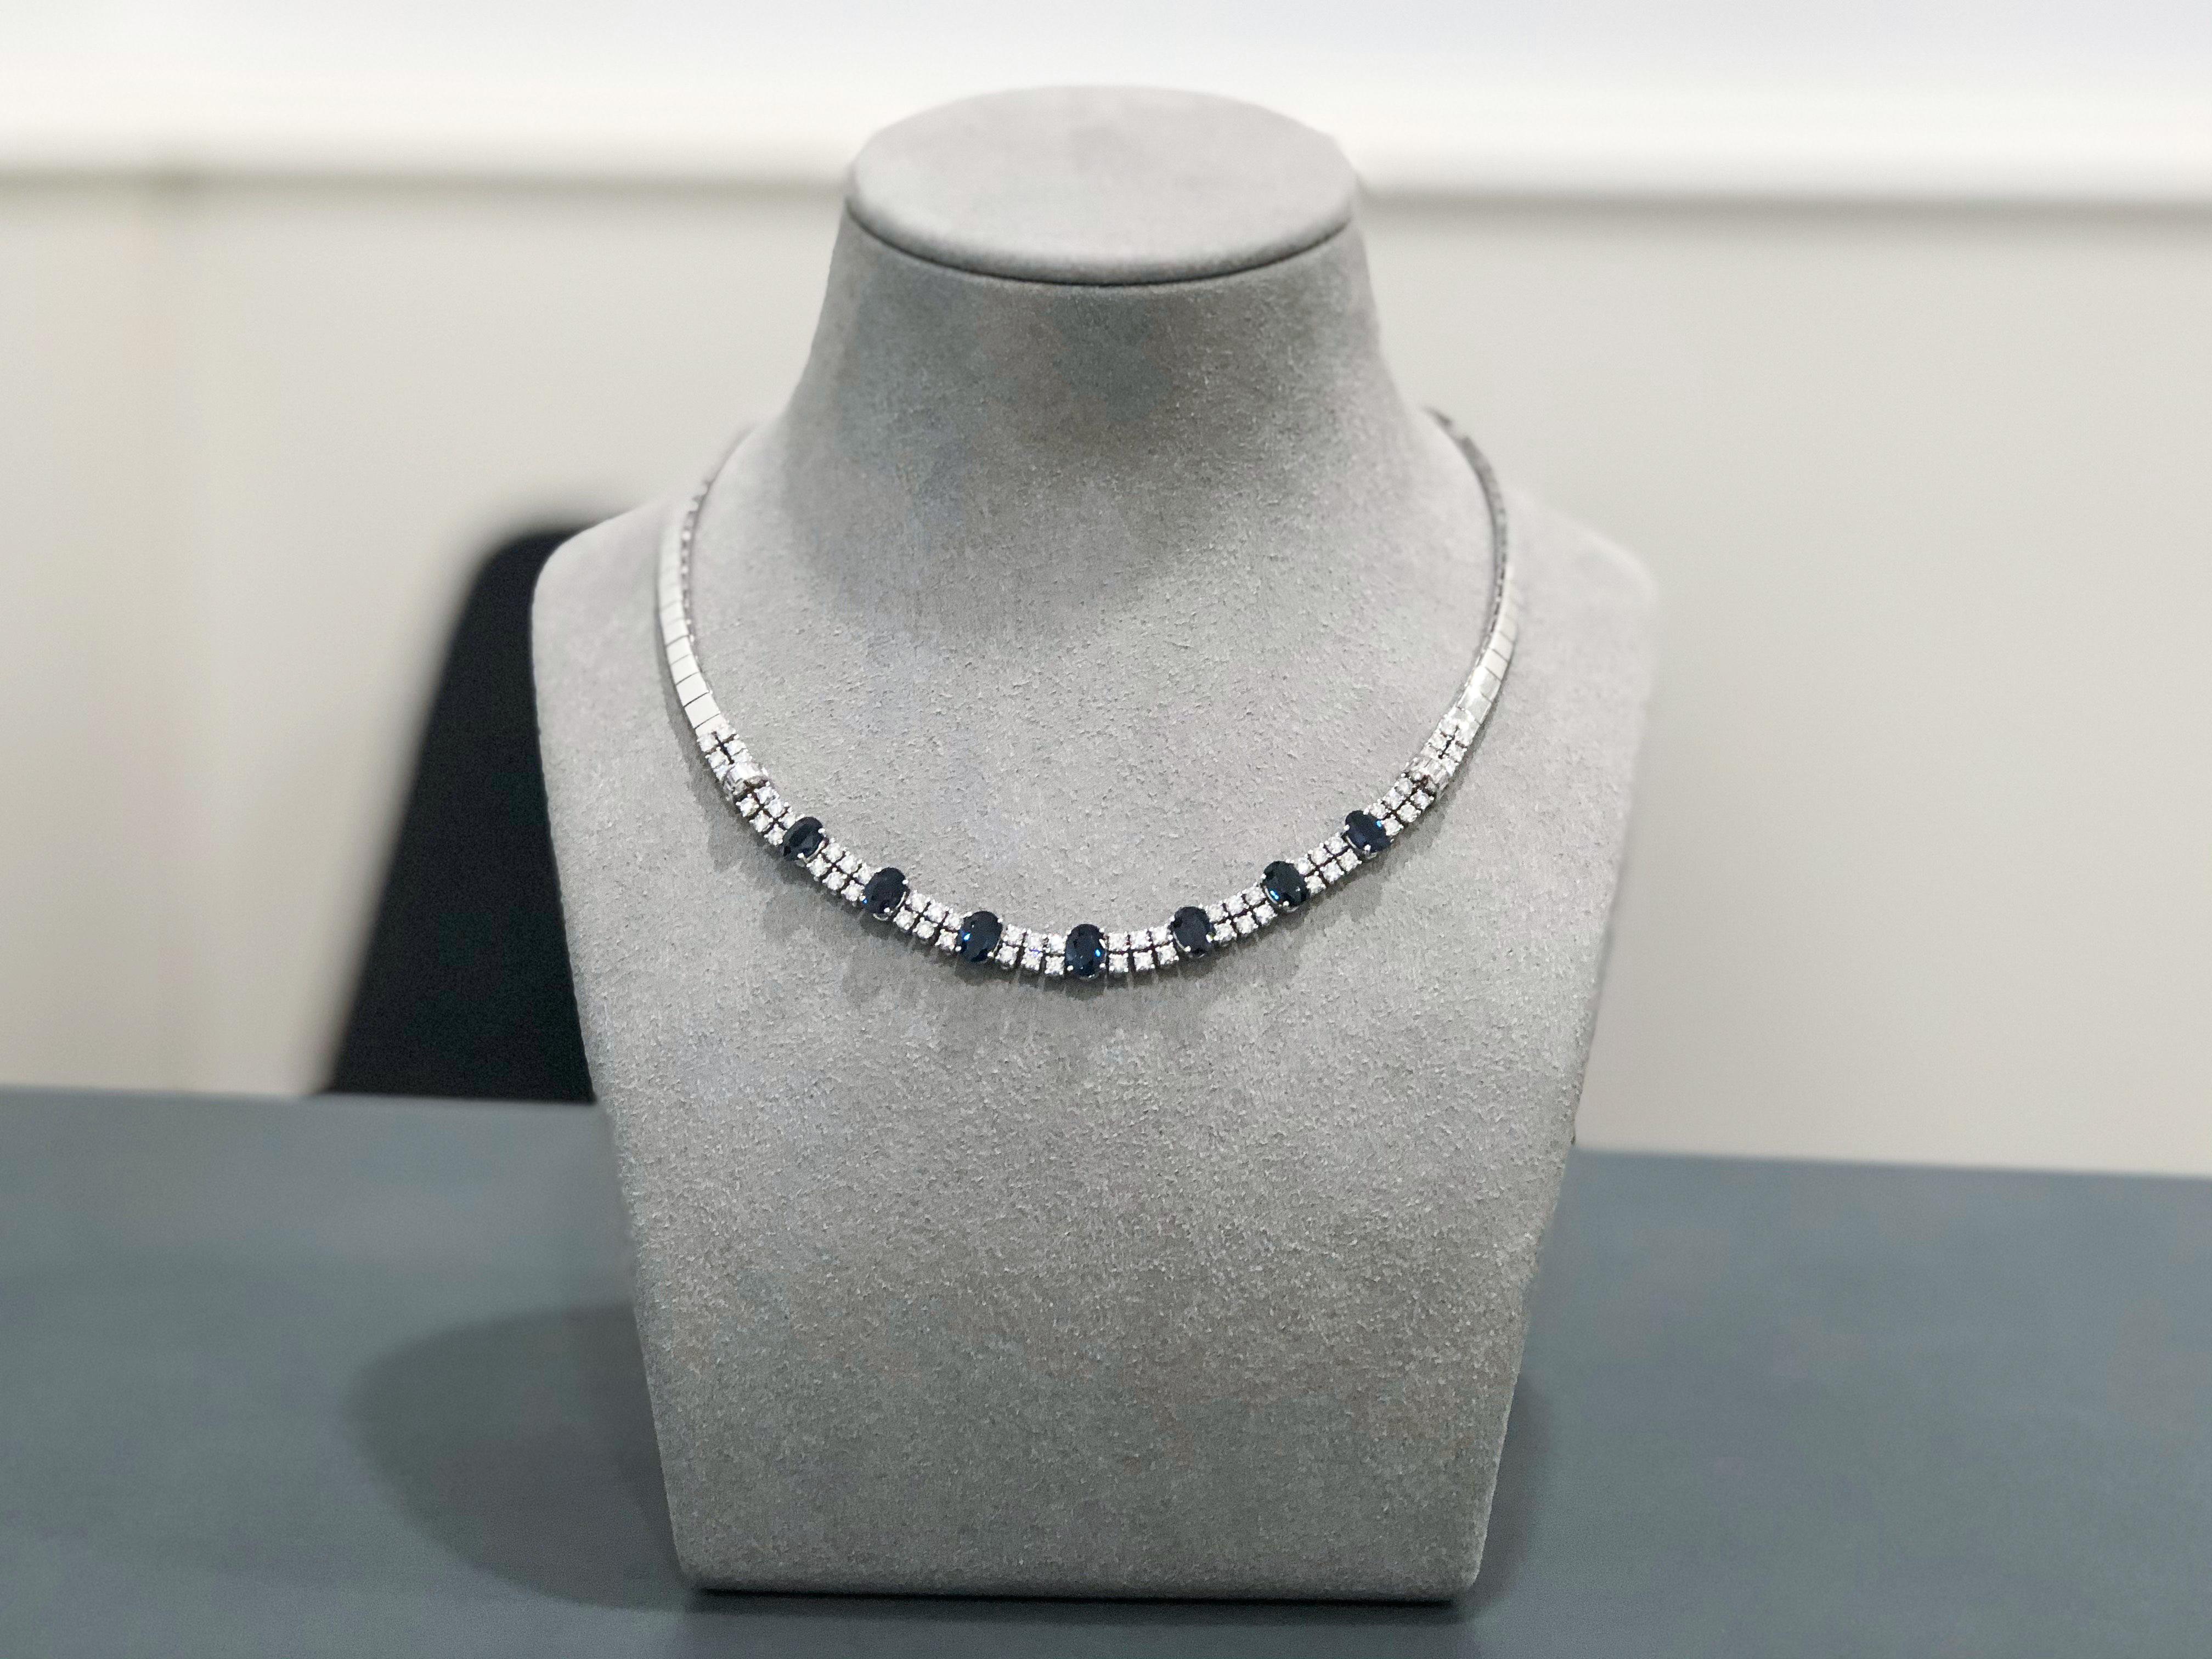 Fashionable necklace set with 7 natural blue sapphires. Each sapphire spaced with 2 rows of round brilliant diamonds. Baguette diamonds channel set in a circular design attached on each side of the necklace. A timeless piece. Set in 18k white